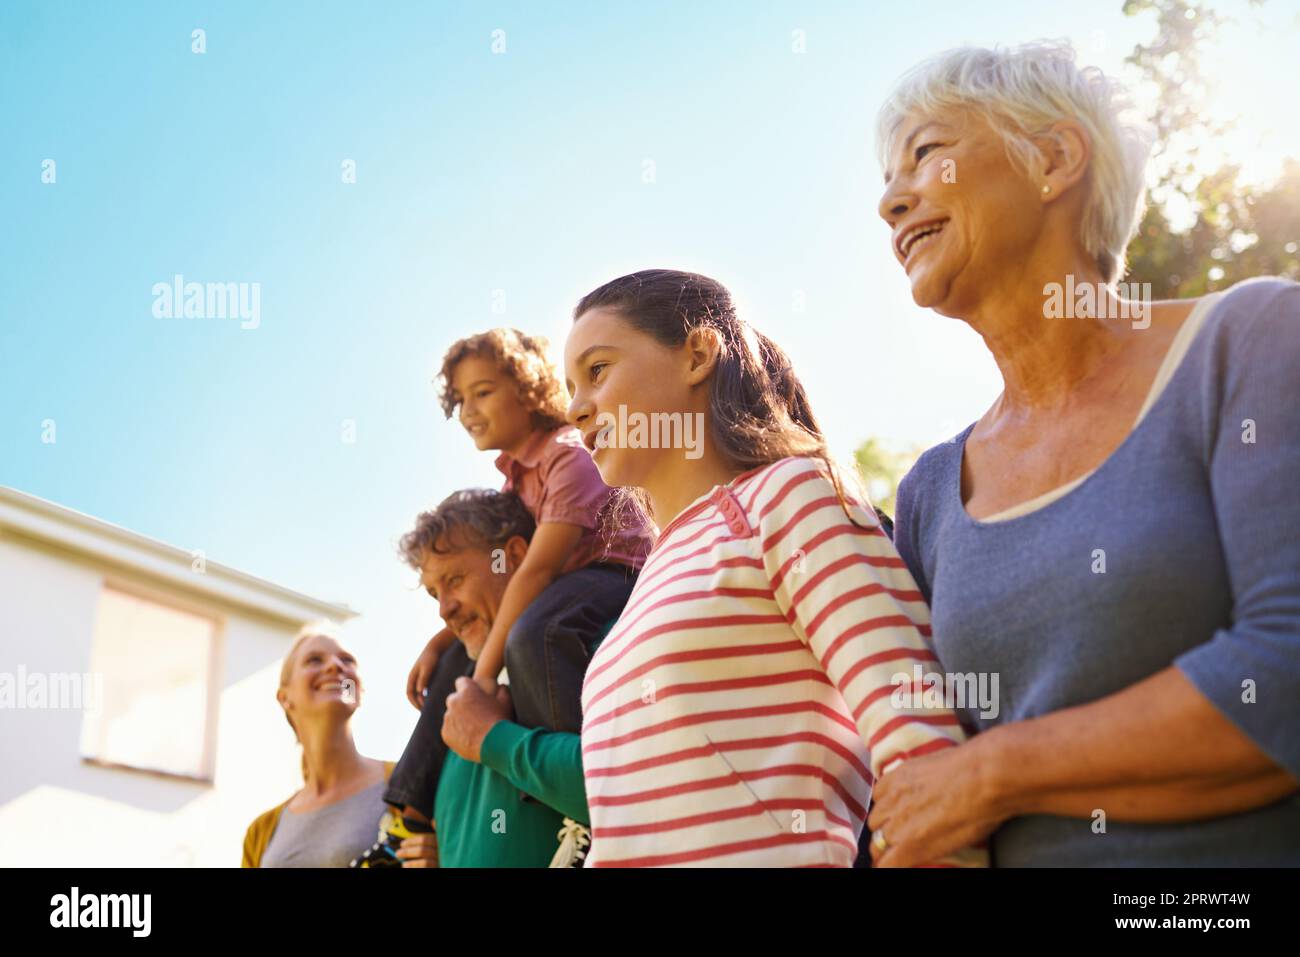 Standing together as a family. Low angle shot of a family outdoors. Stock Photo